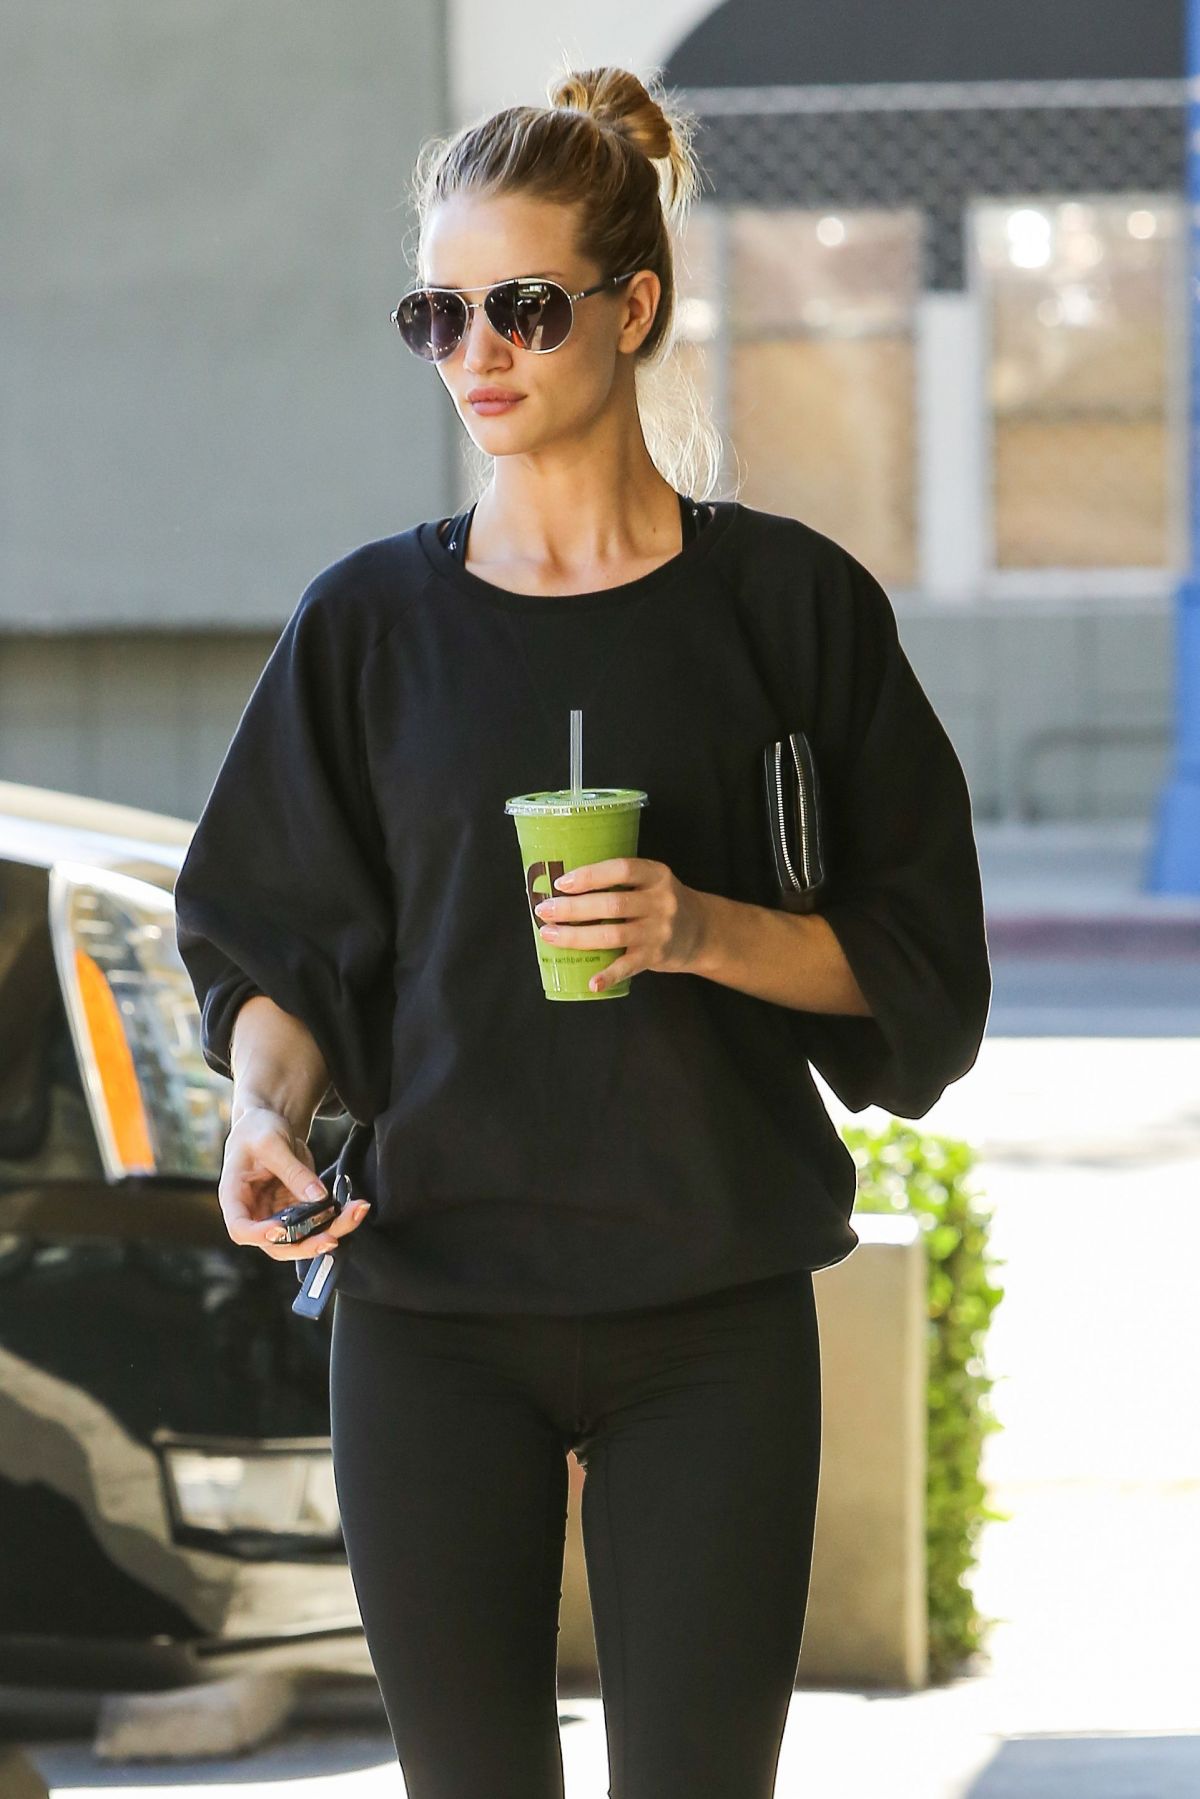 ROSIE HUNTINGTON-WHITELEY in Leggings Heading to a Gym in Beverly Hills ...